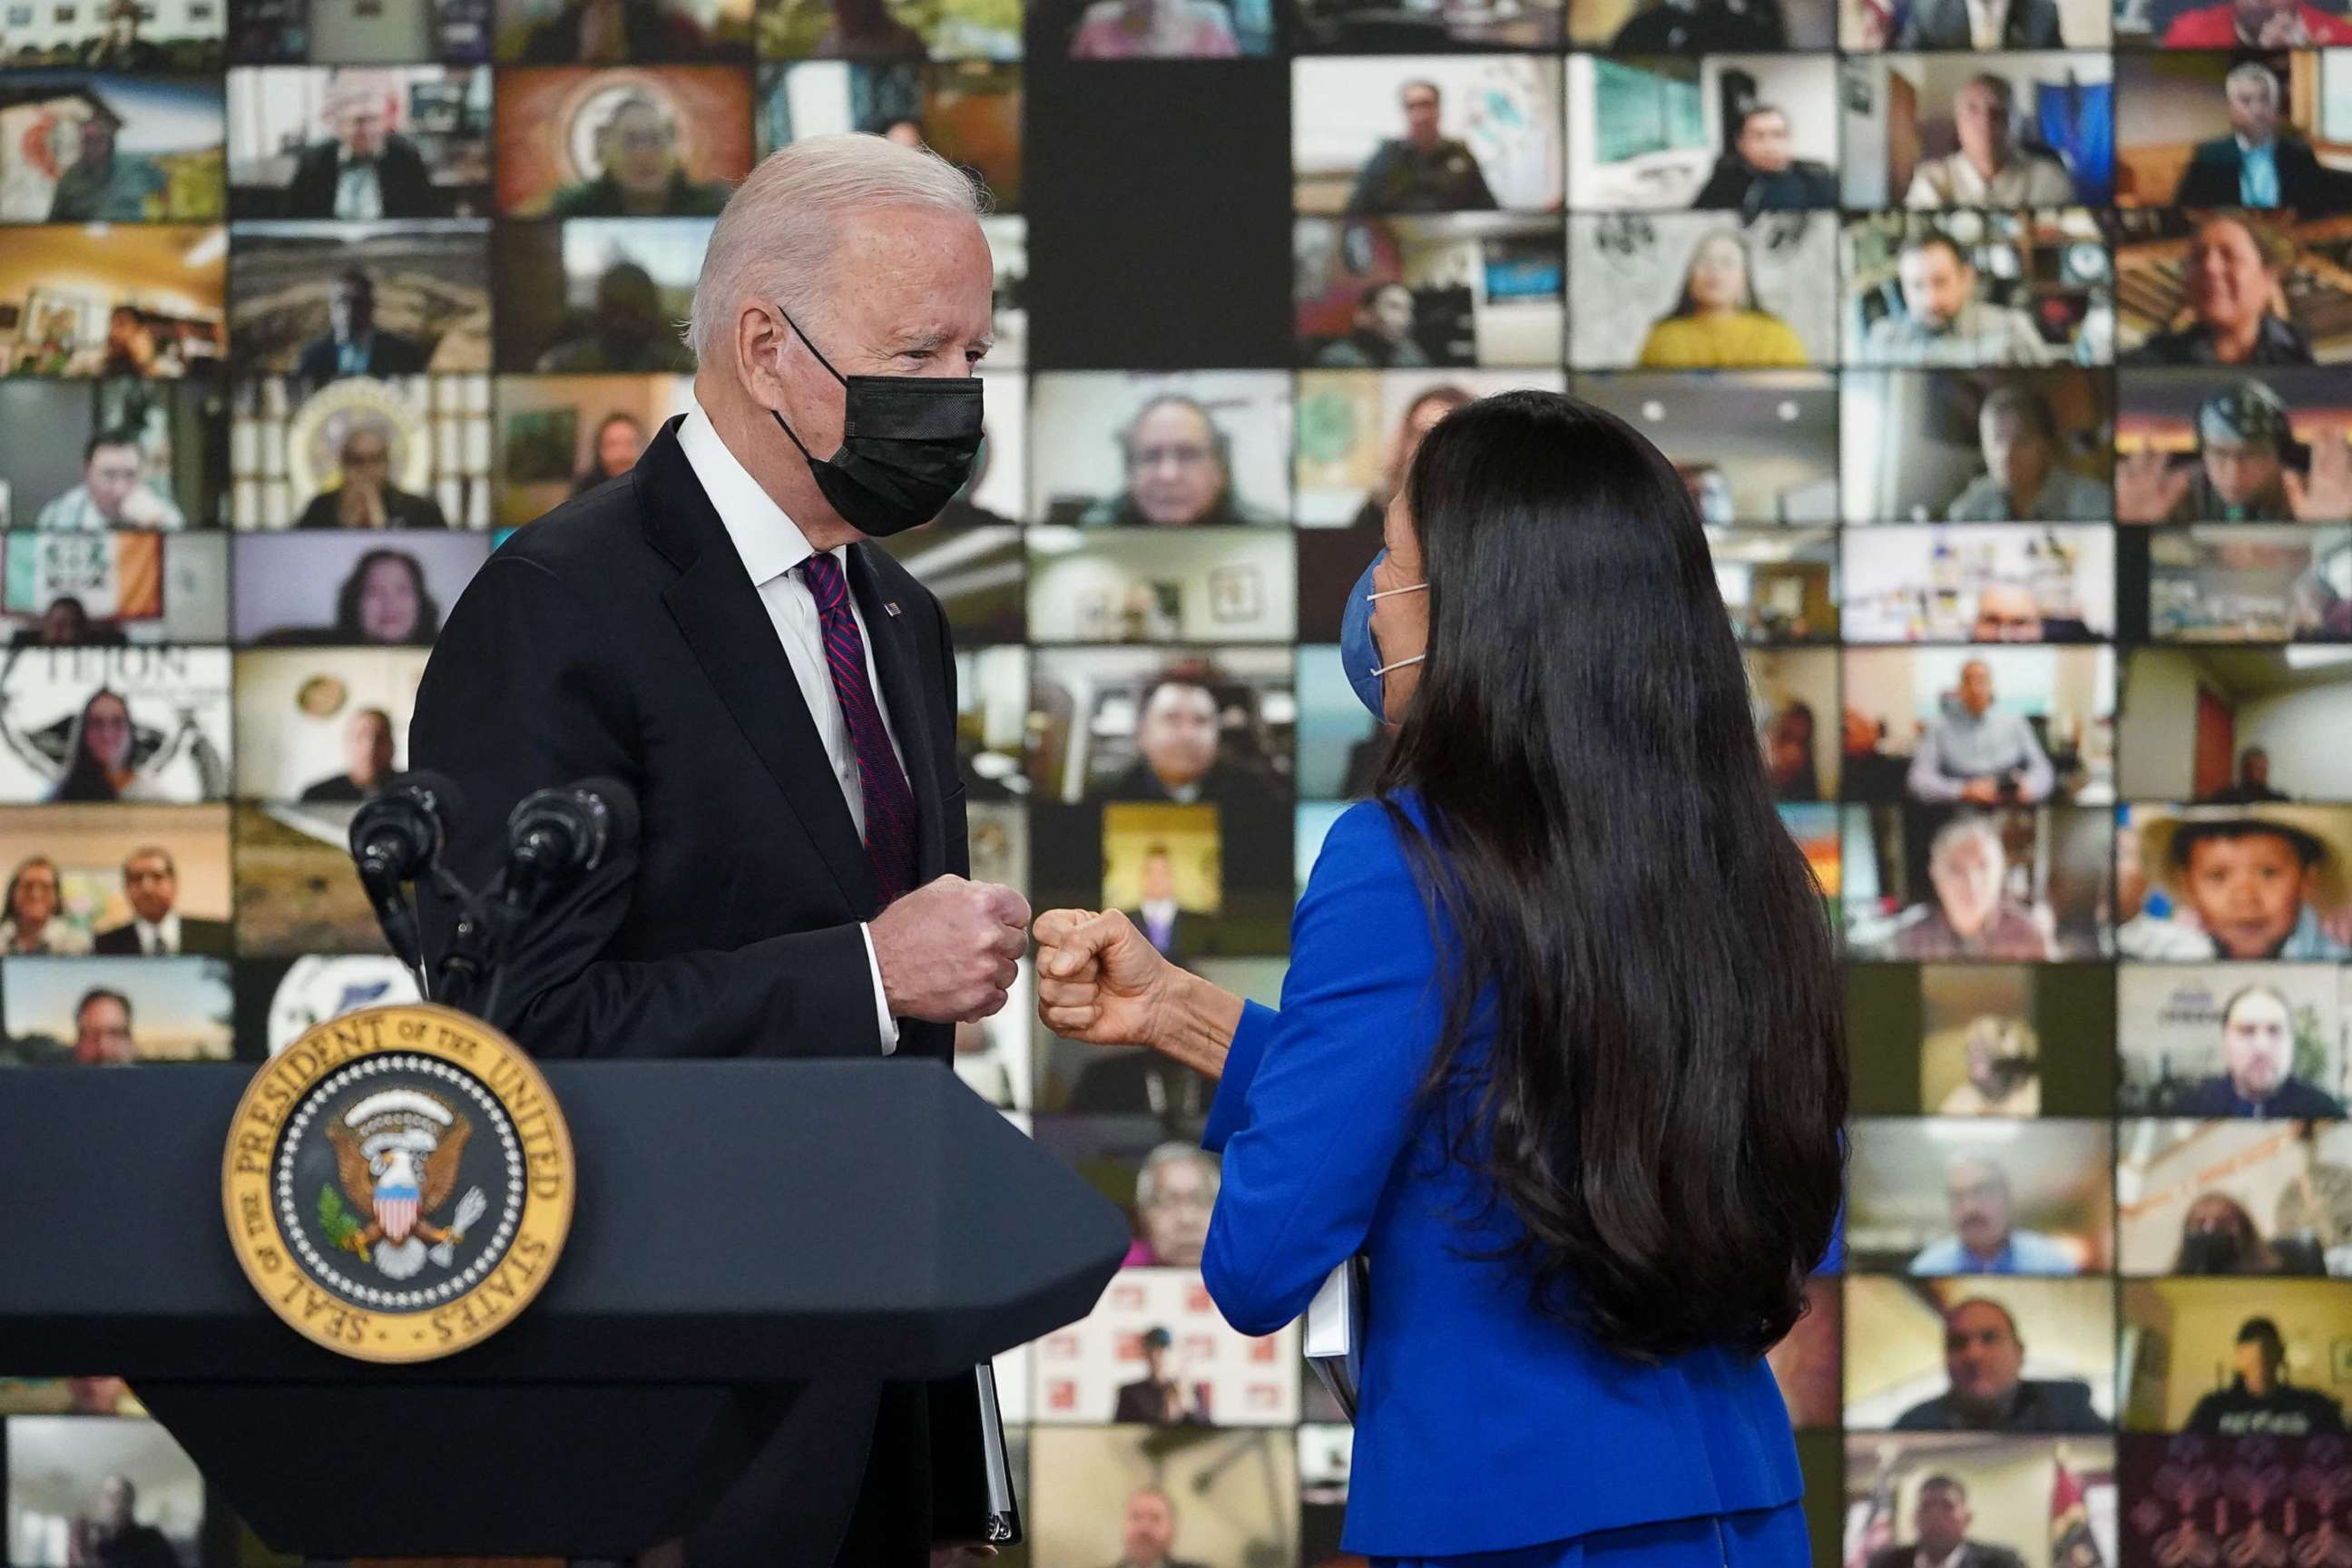 PHOTO: President Joe Biden and Secretary of the Interior Deb Haaland greet each other at the Tribal Nations Summit in the South Court Auditorium of the Eisenhower Executive Office Building, next to the White House, in Washington, D.C., Nov. 15, 2021.